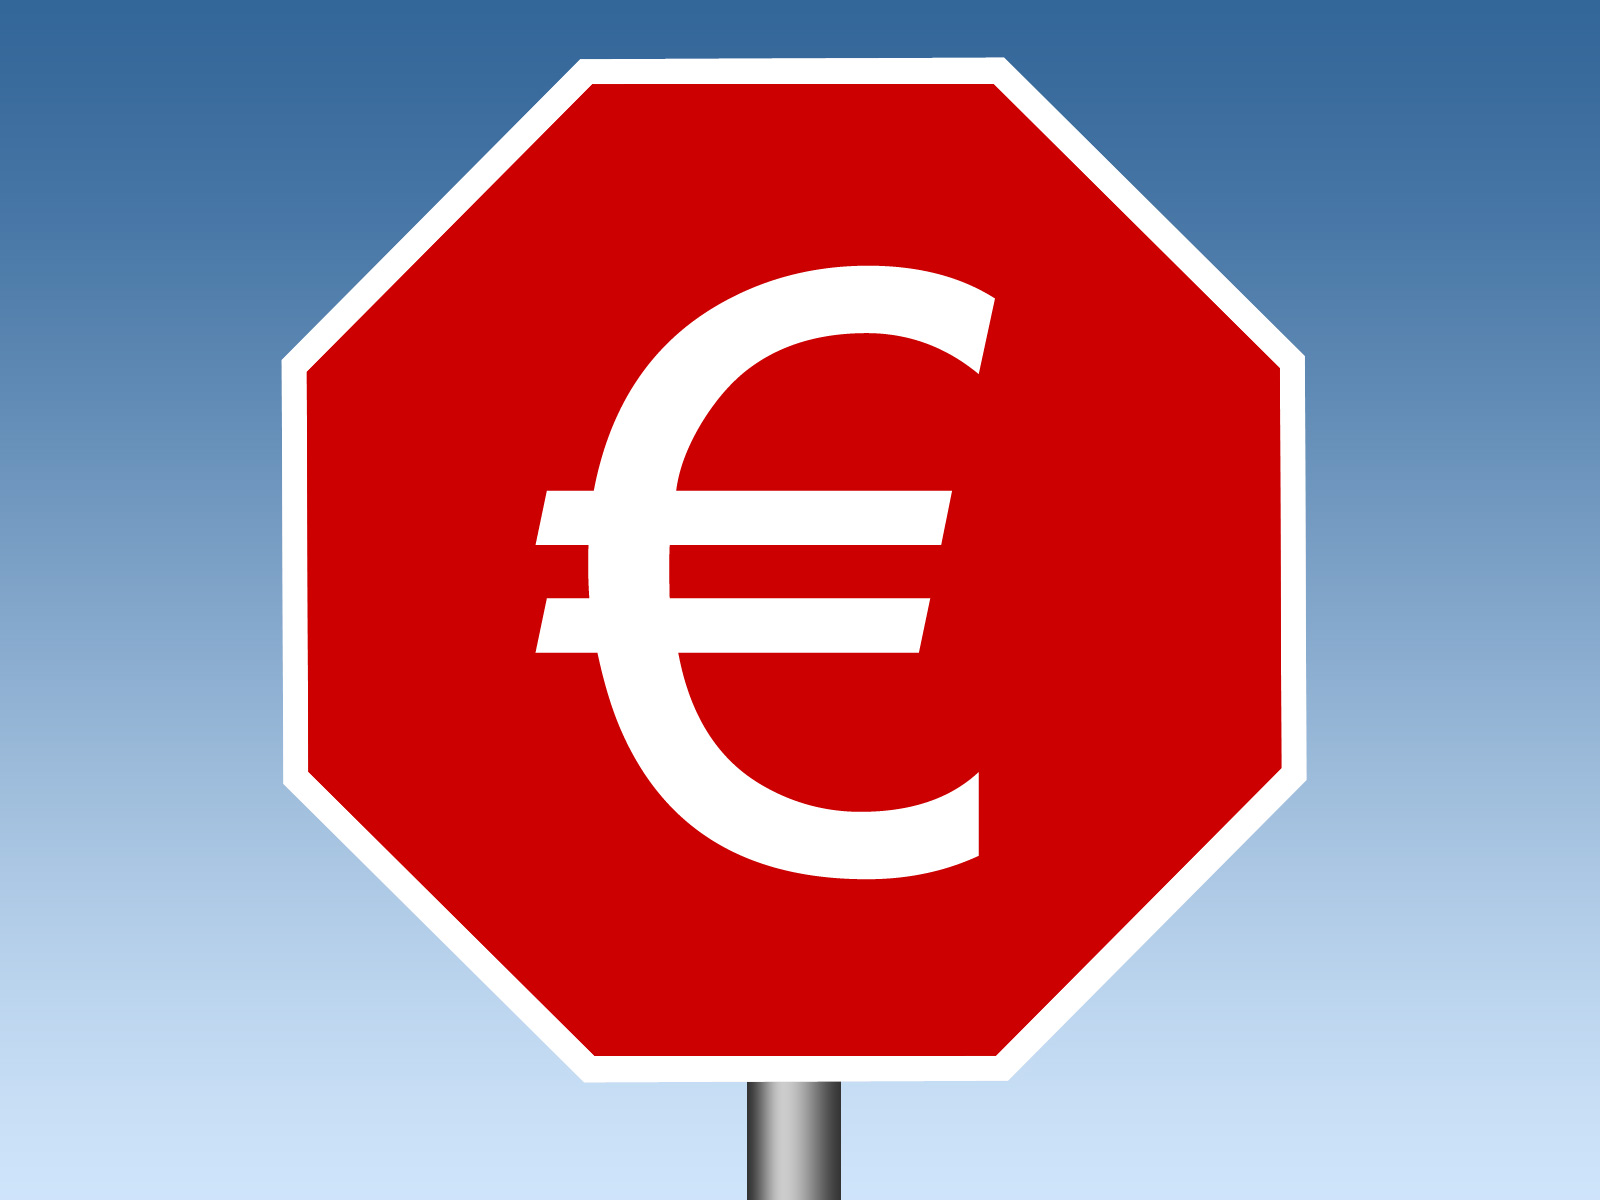 Euro sign on a traffic stop